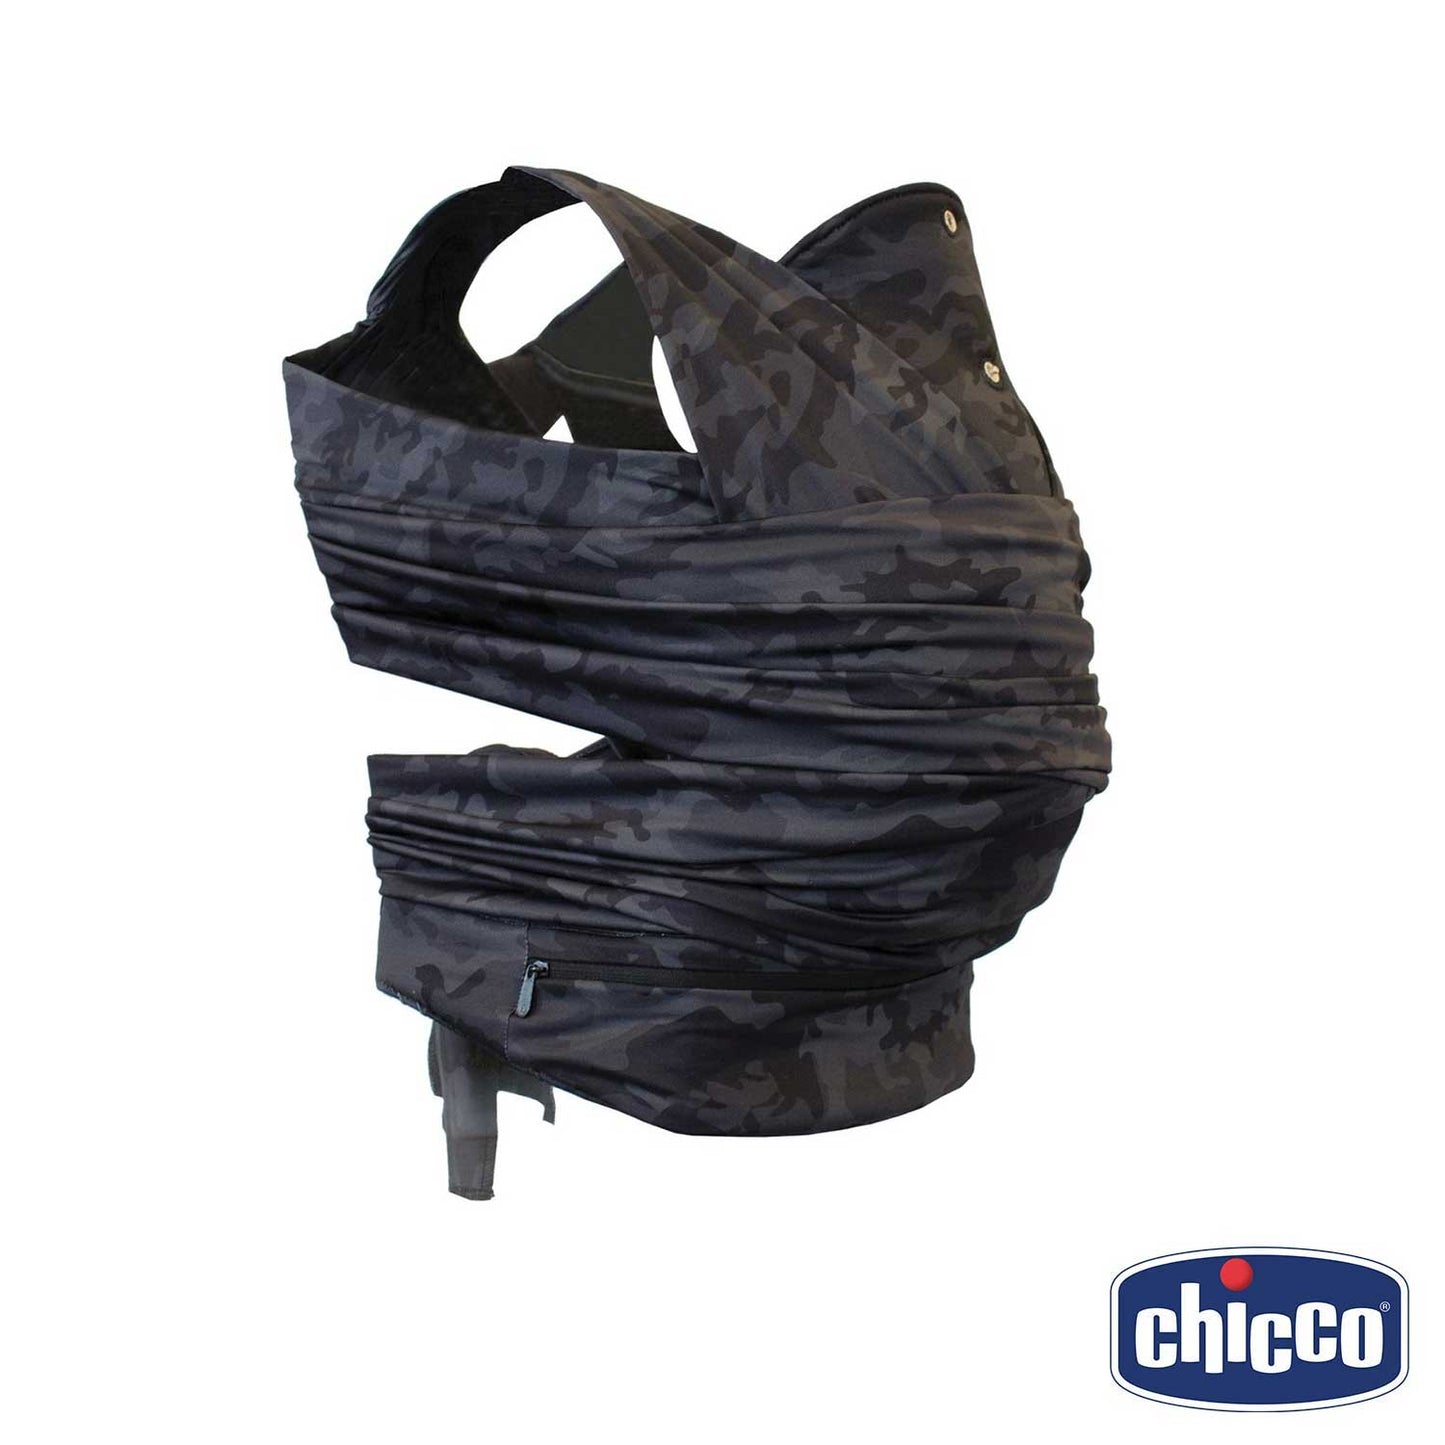 Chicco - Boppy ComfyFit Baby Carrier